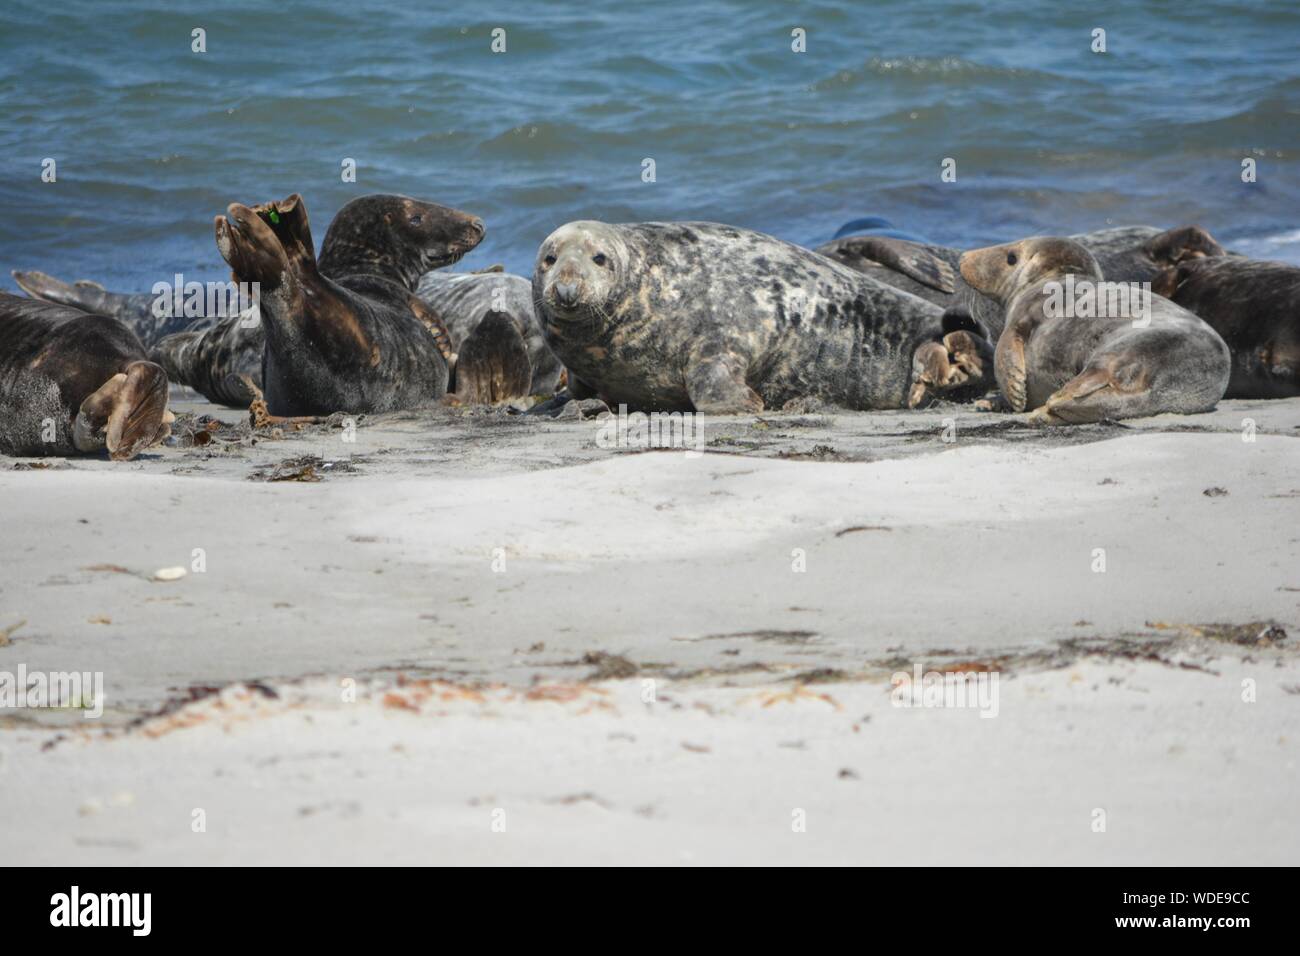 Sea Animals Relaxing At Beach Stock Photo